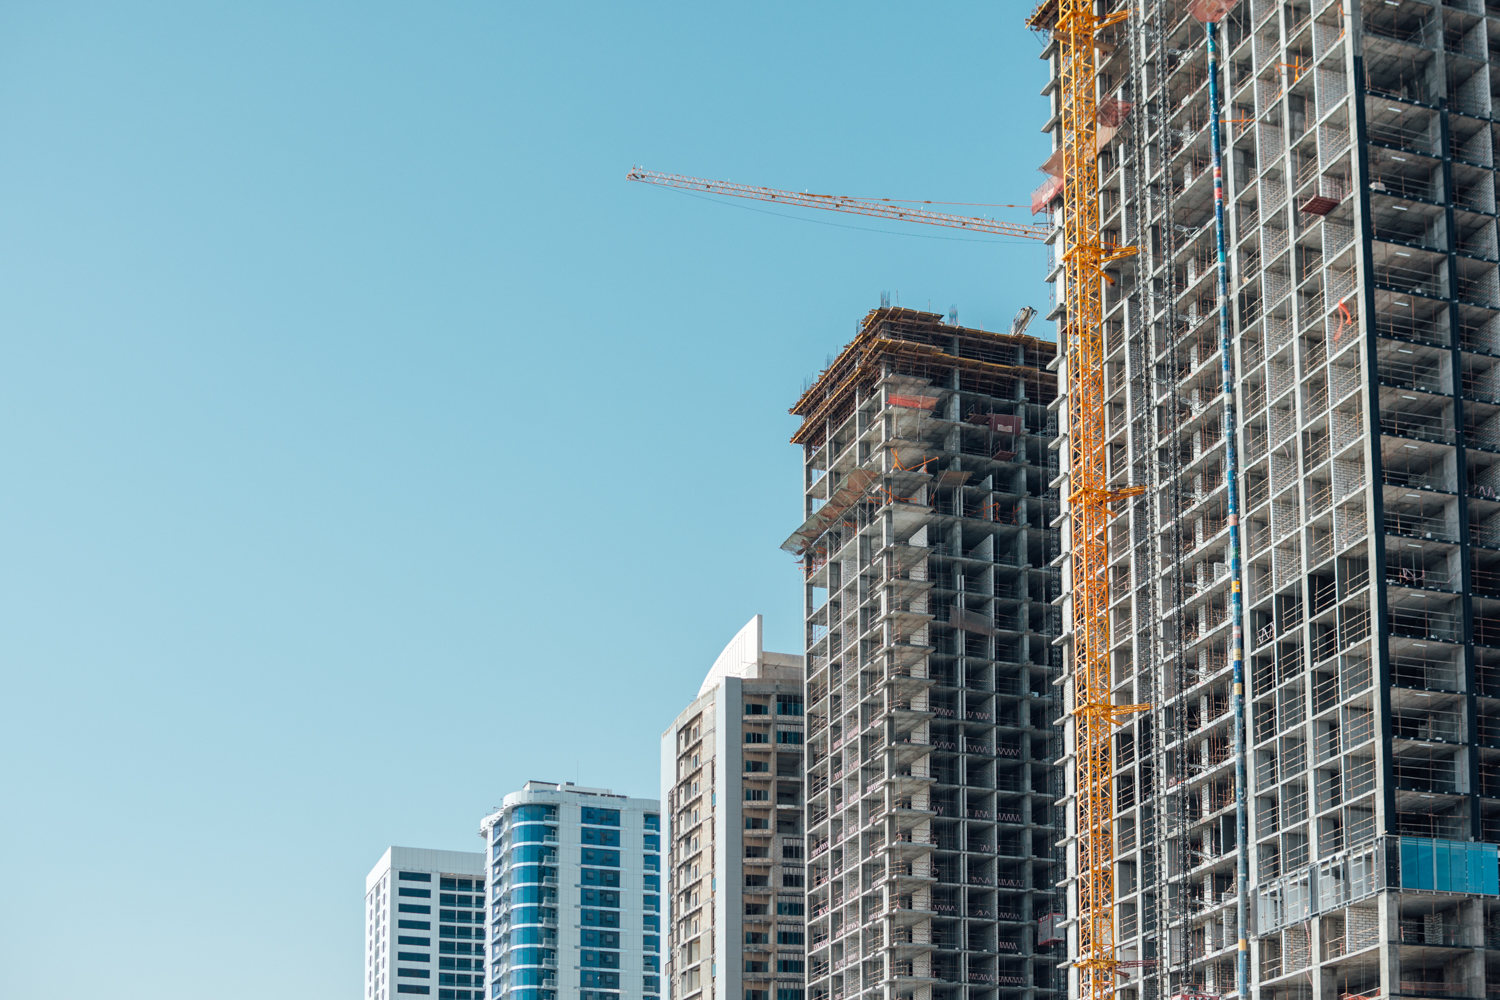 A photograph of a collection of high rise buildings at certain points of construction.